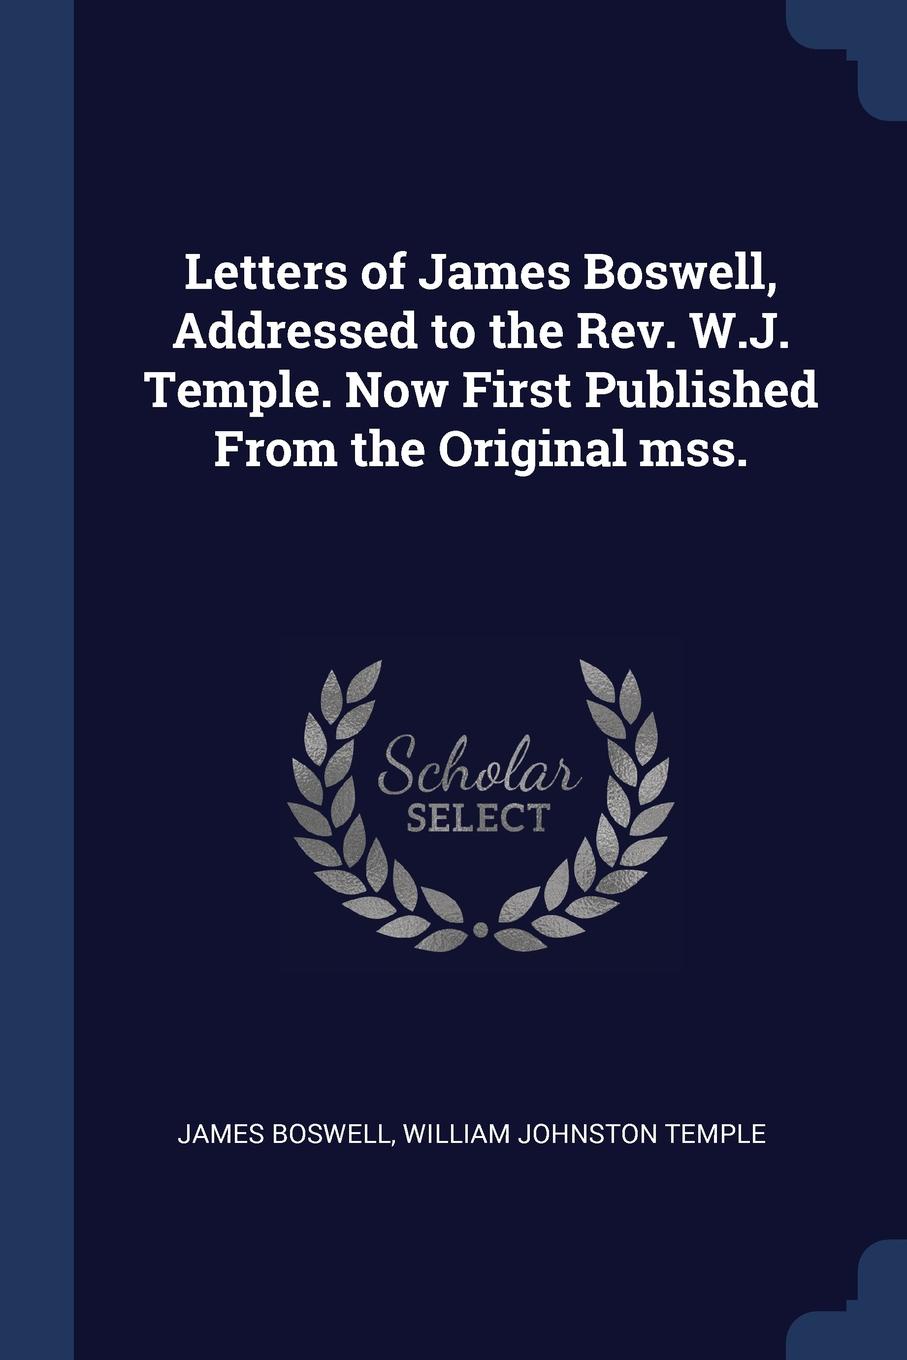 Letters of James Boswell, Addressed to the Rev. W.J. Temple. Now First Published From the Original mss.